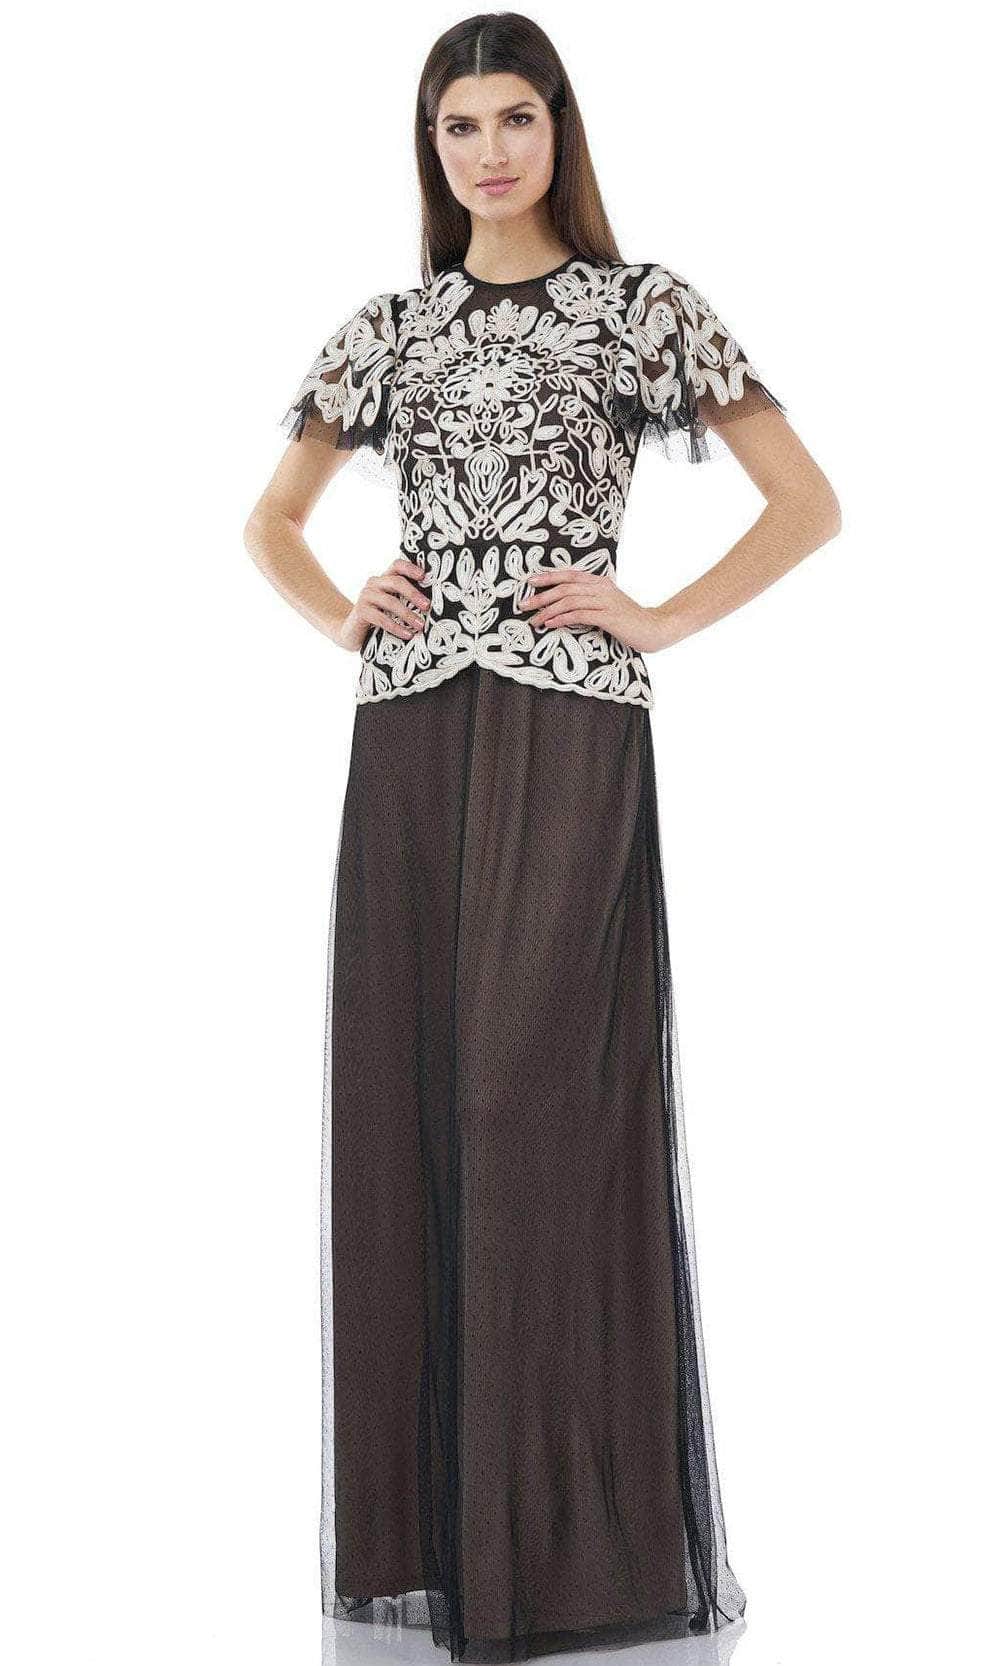 Image of JS Collections 867032 - Short Sleeved Embellished Fully Lined Dress